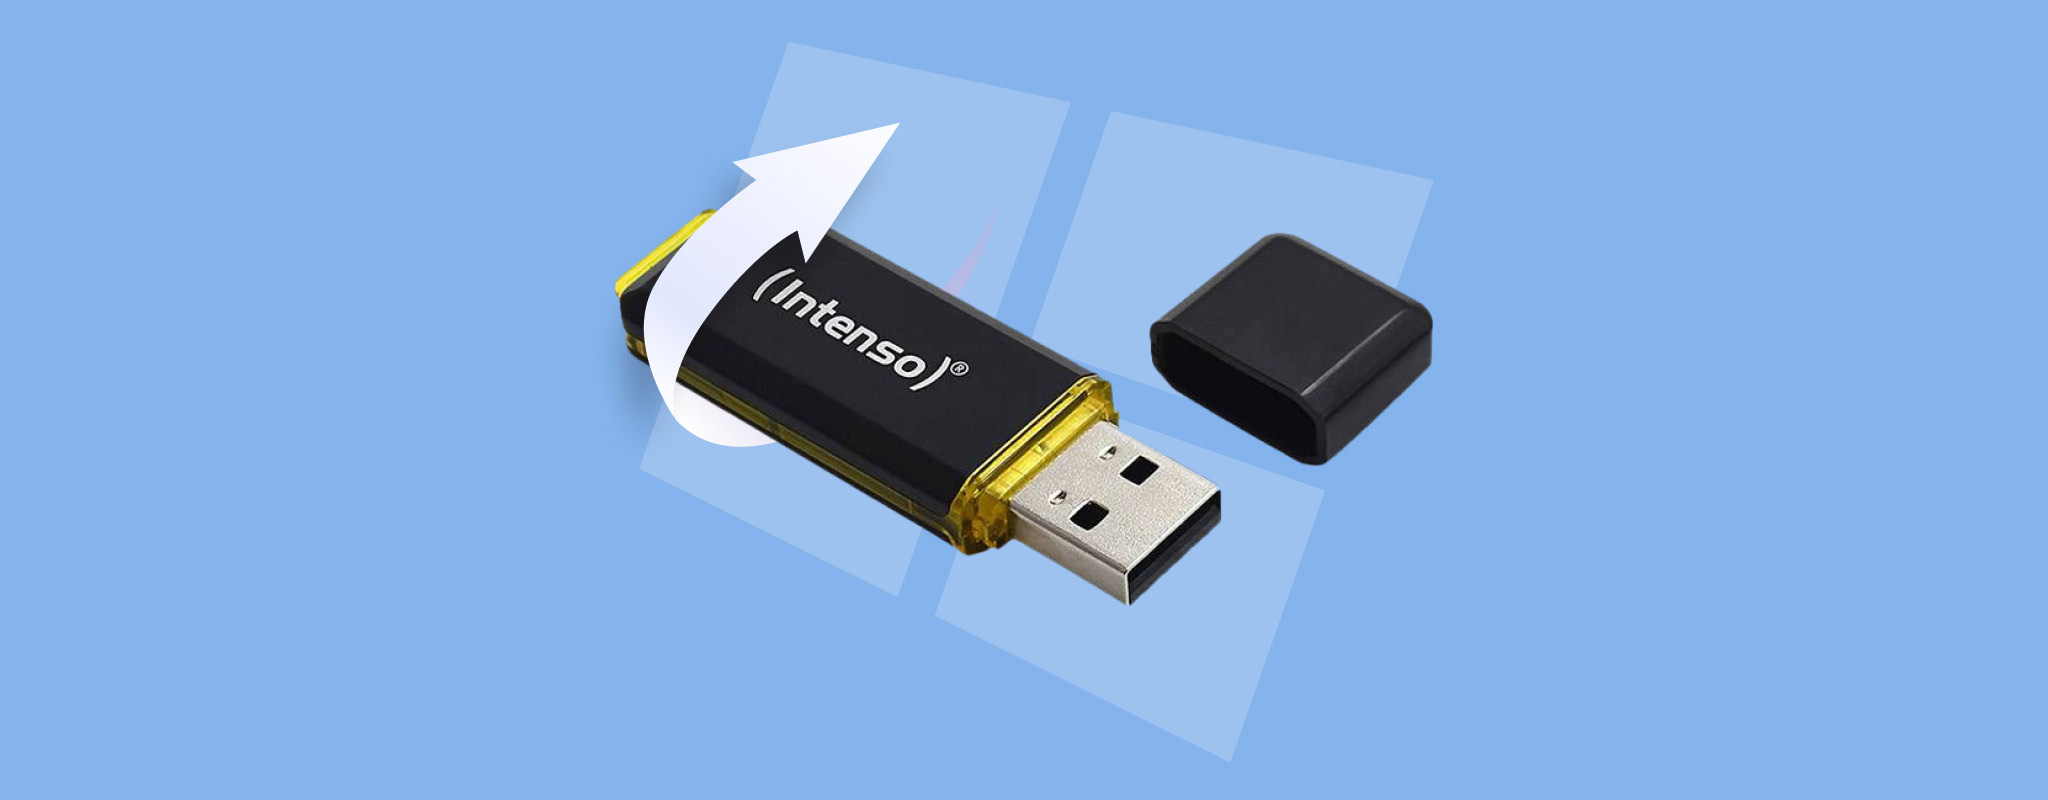 recover data from intenso usb stick